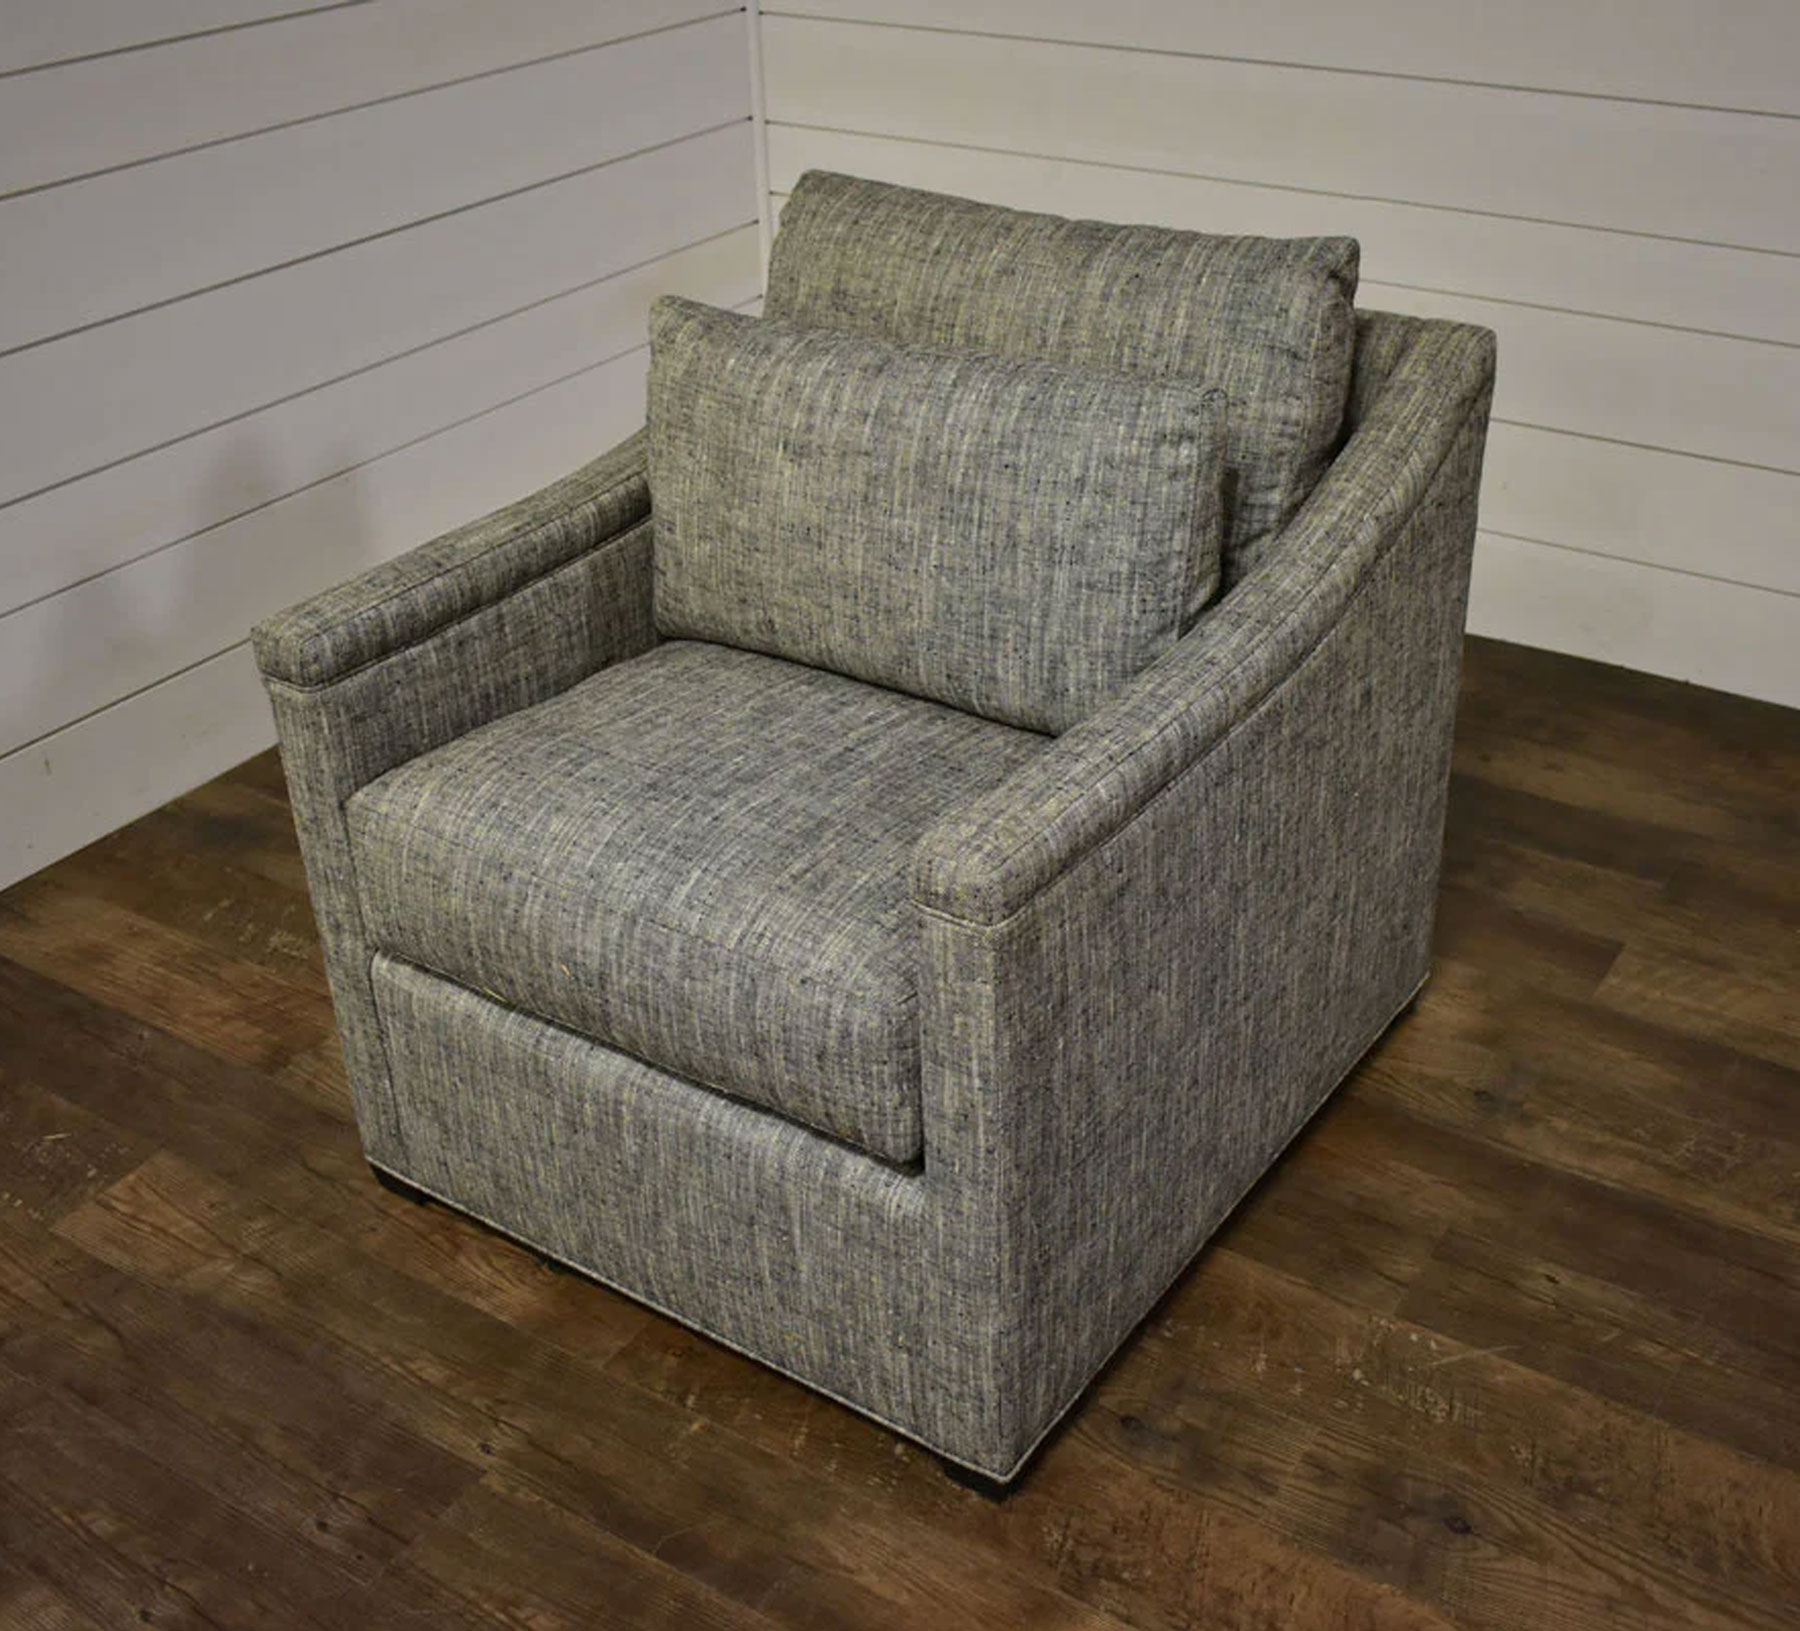 Wesley Hall 5196 Whittles Lounge Chair in Matra Thunder Fabric